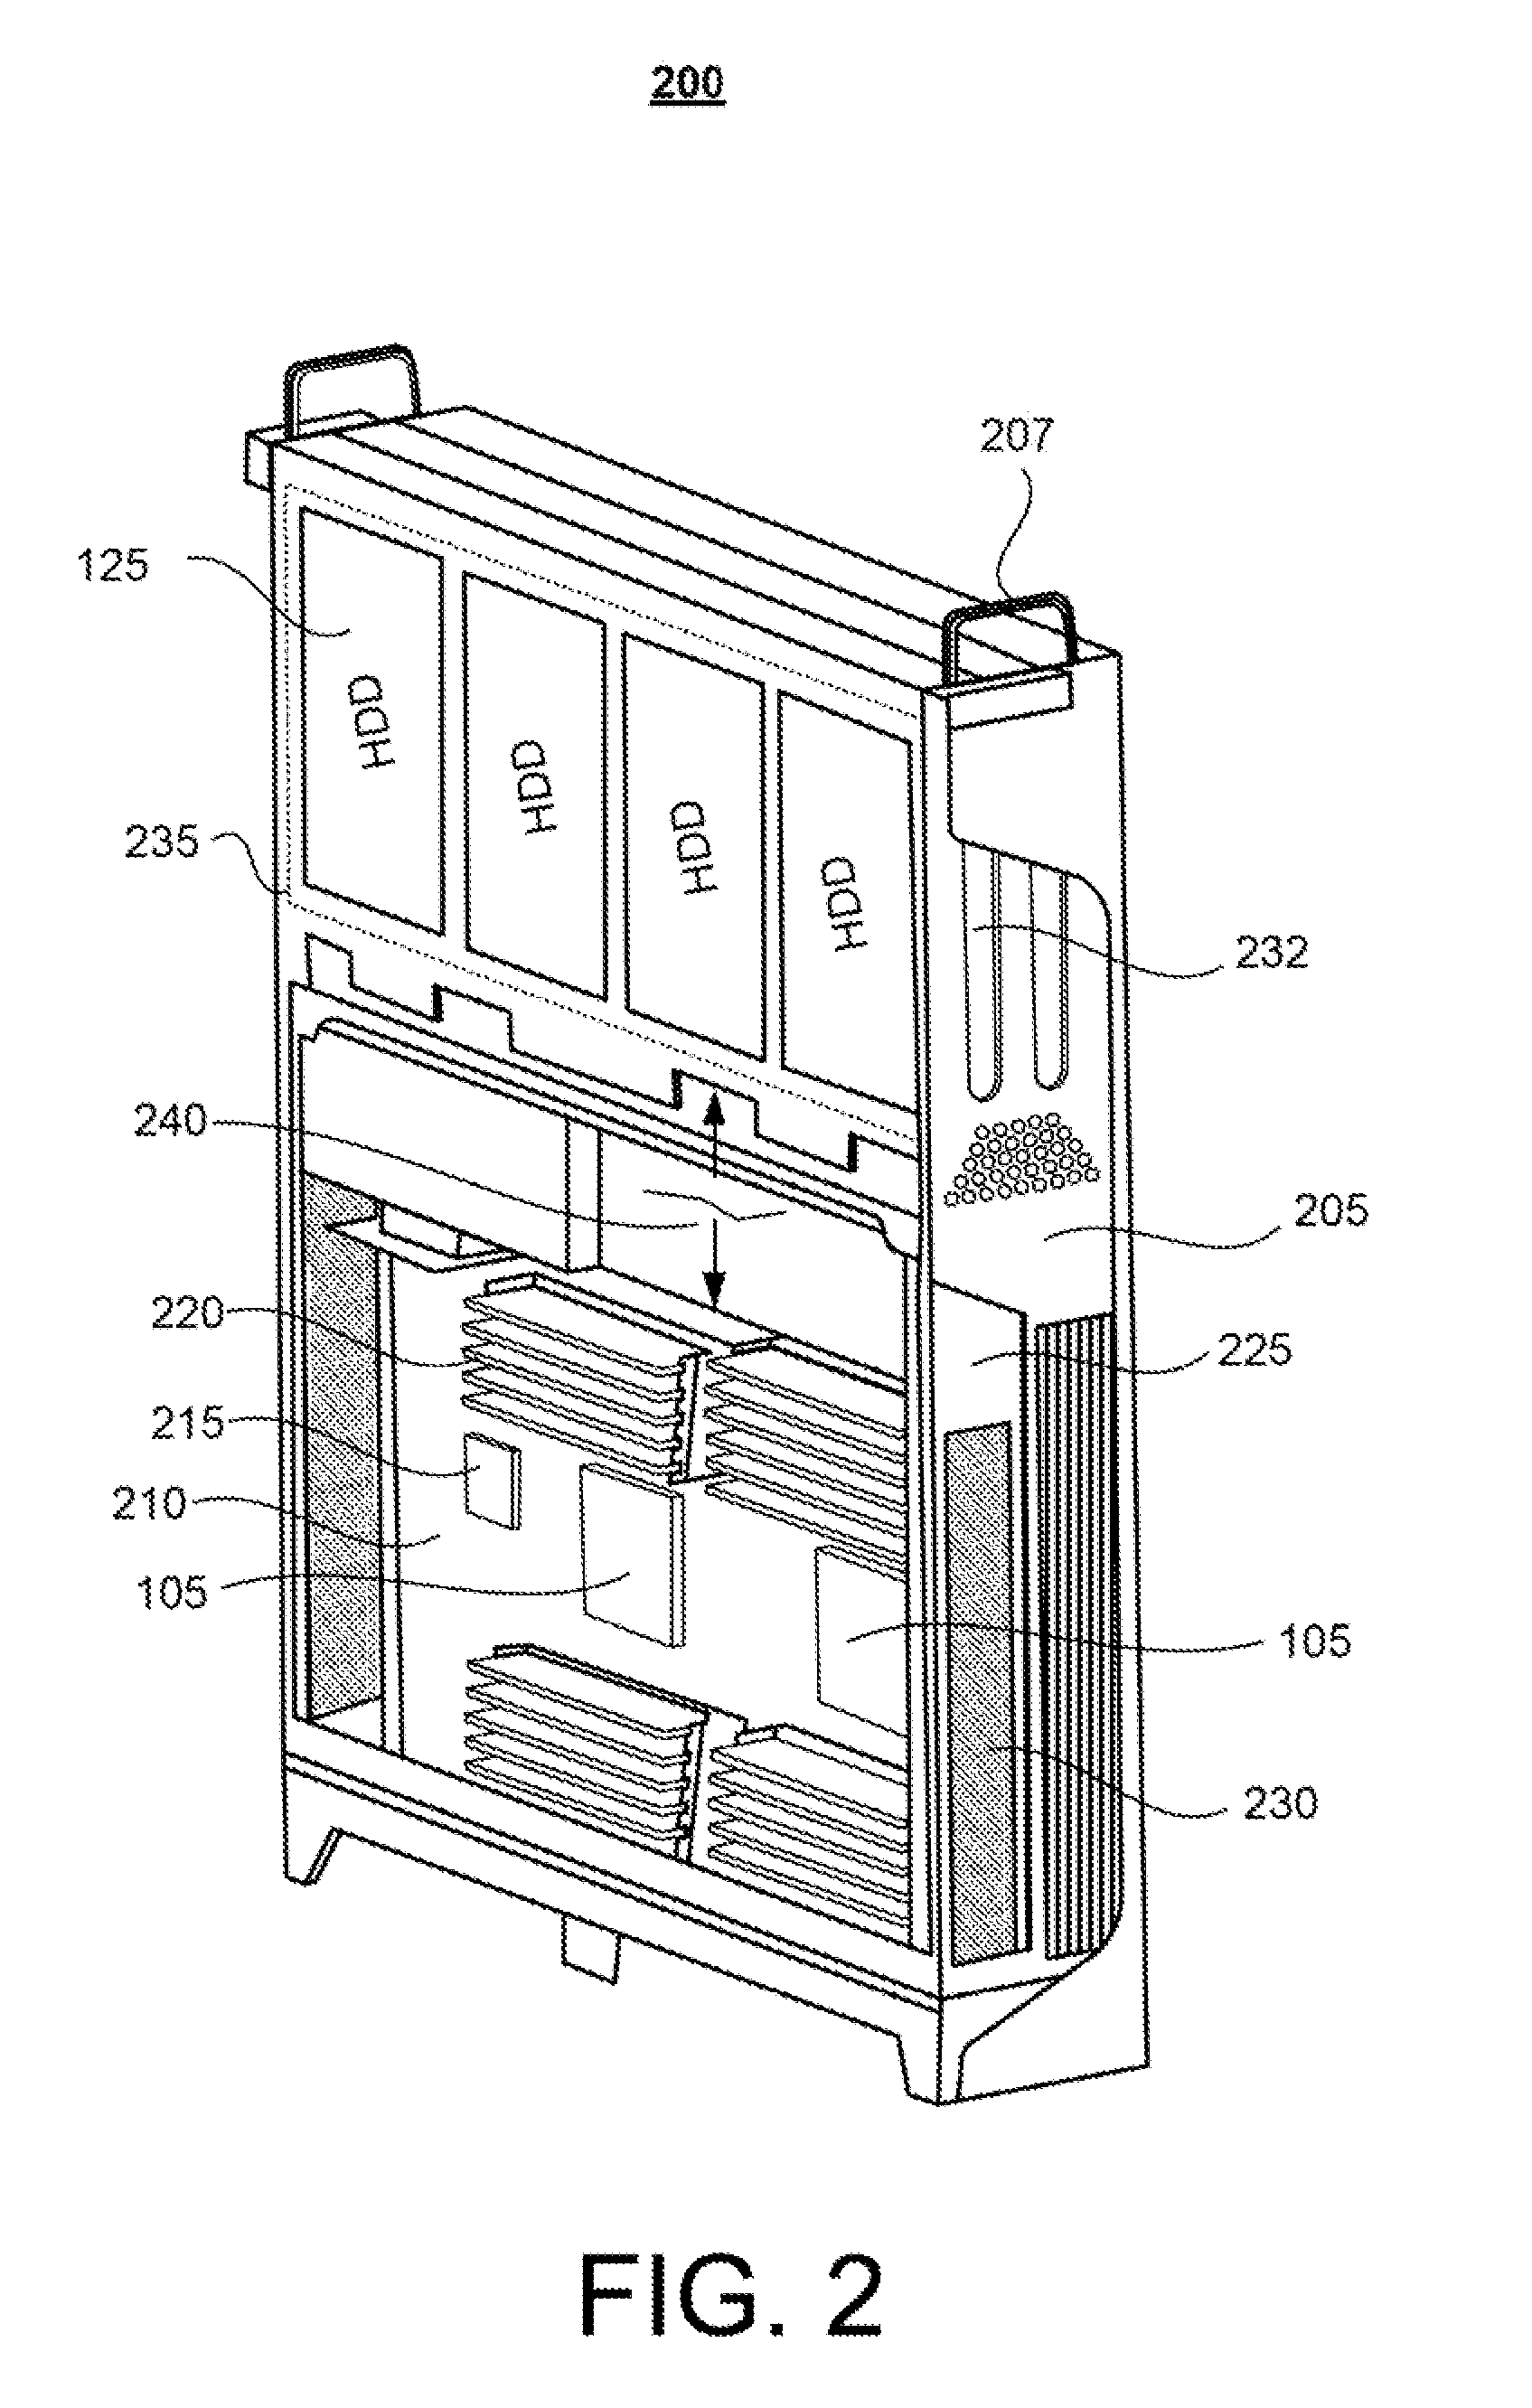 System and Method for Powering Multiple Electronic Devices Operating Within an Immersion Cooling Vessel